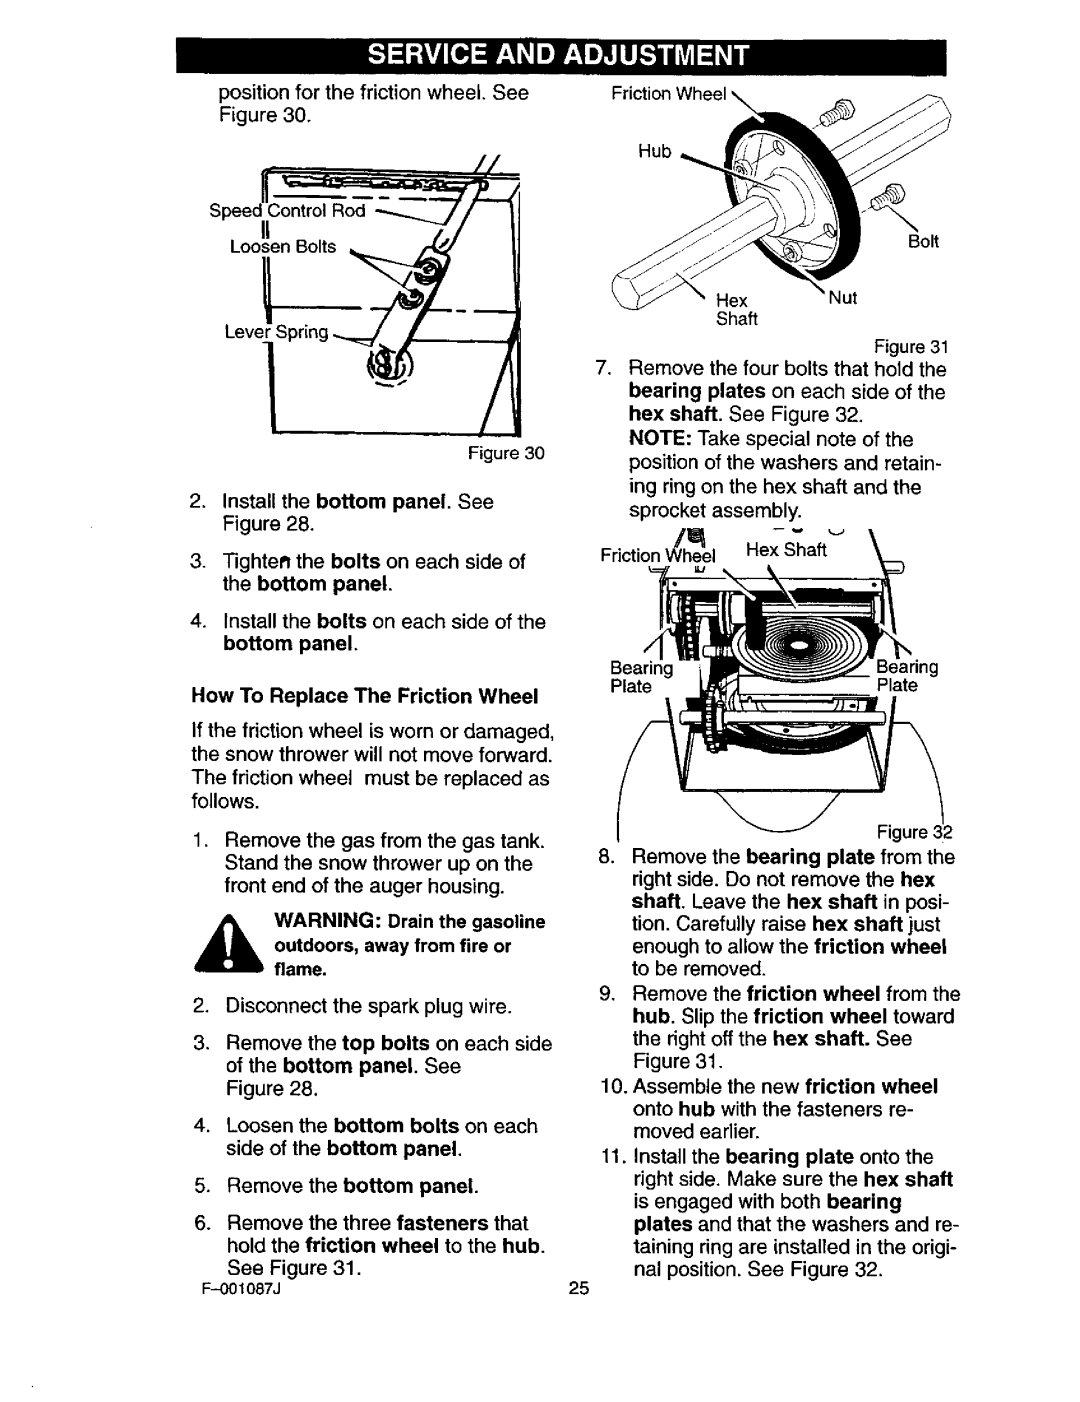 Craftsman 536.88644 manual How To Replace The Friction Wheel 